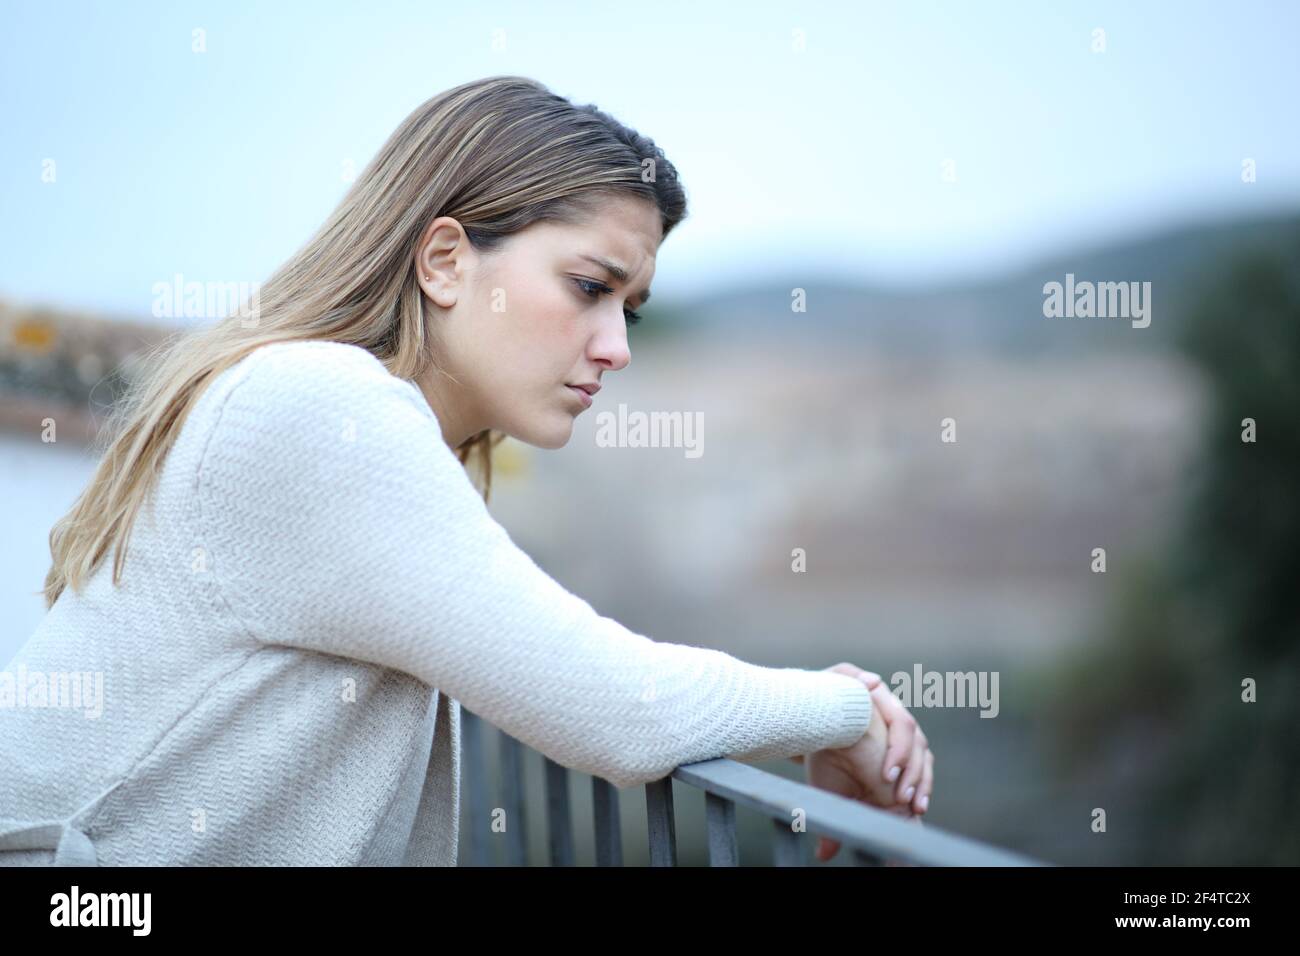 Sad woman looking down in a house balcony complaining alone in a town Stock Photo